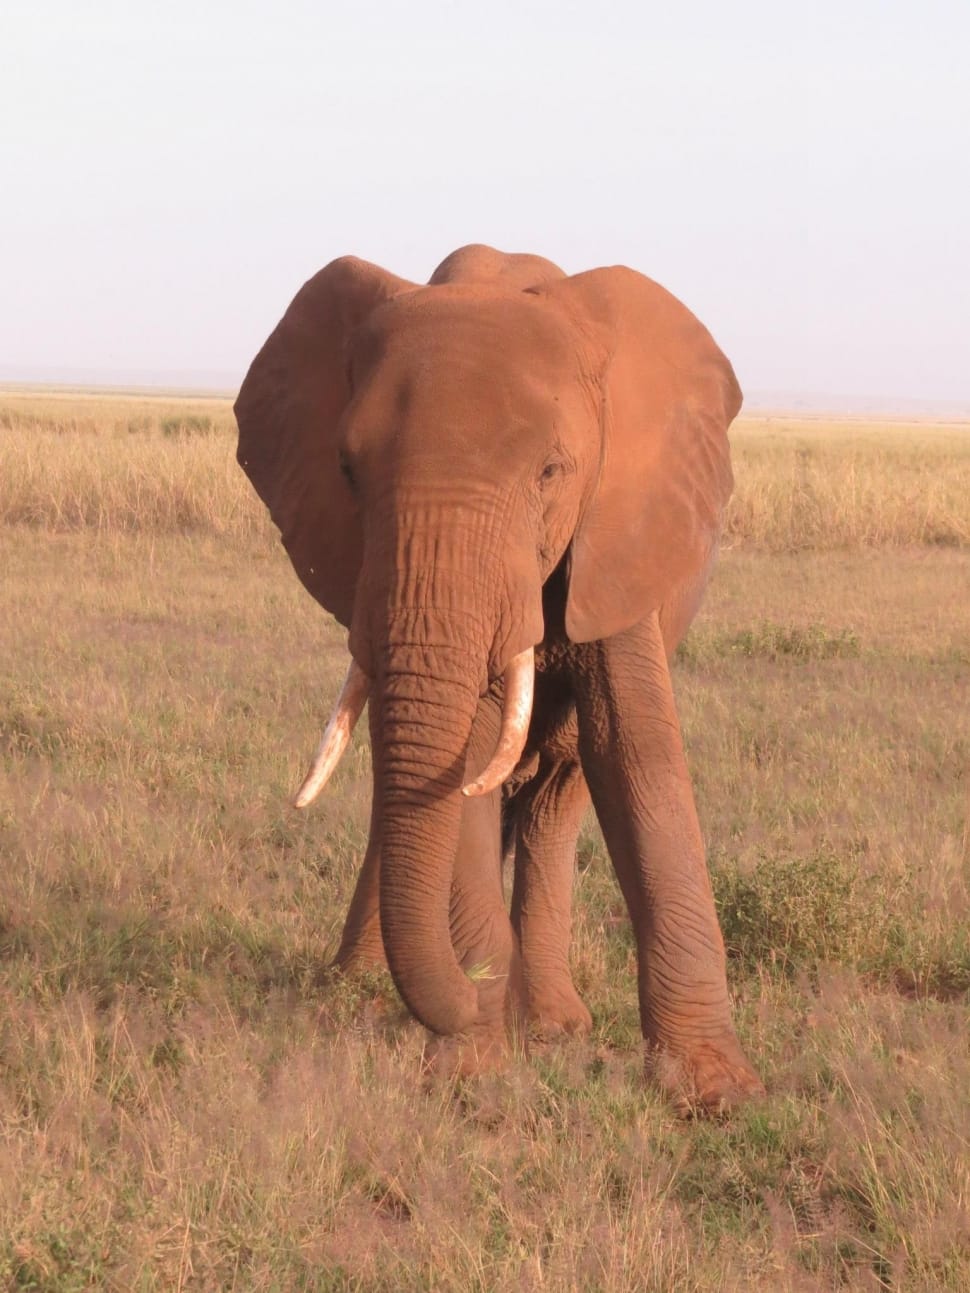 brown elephant standing on grass ground during daytime preview